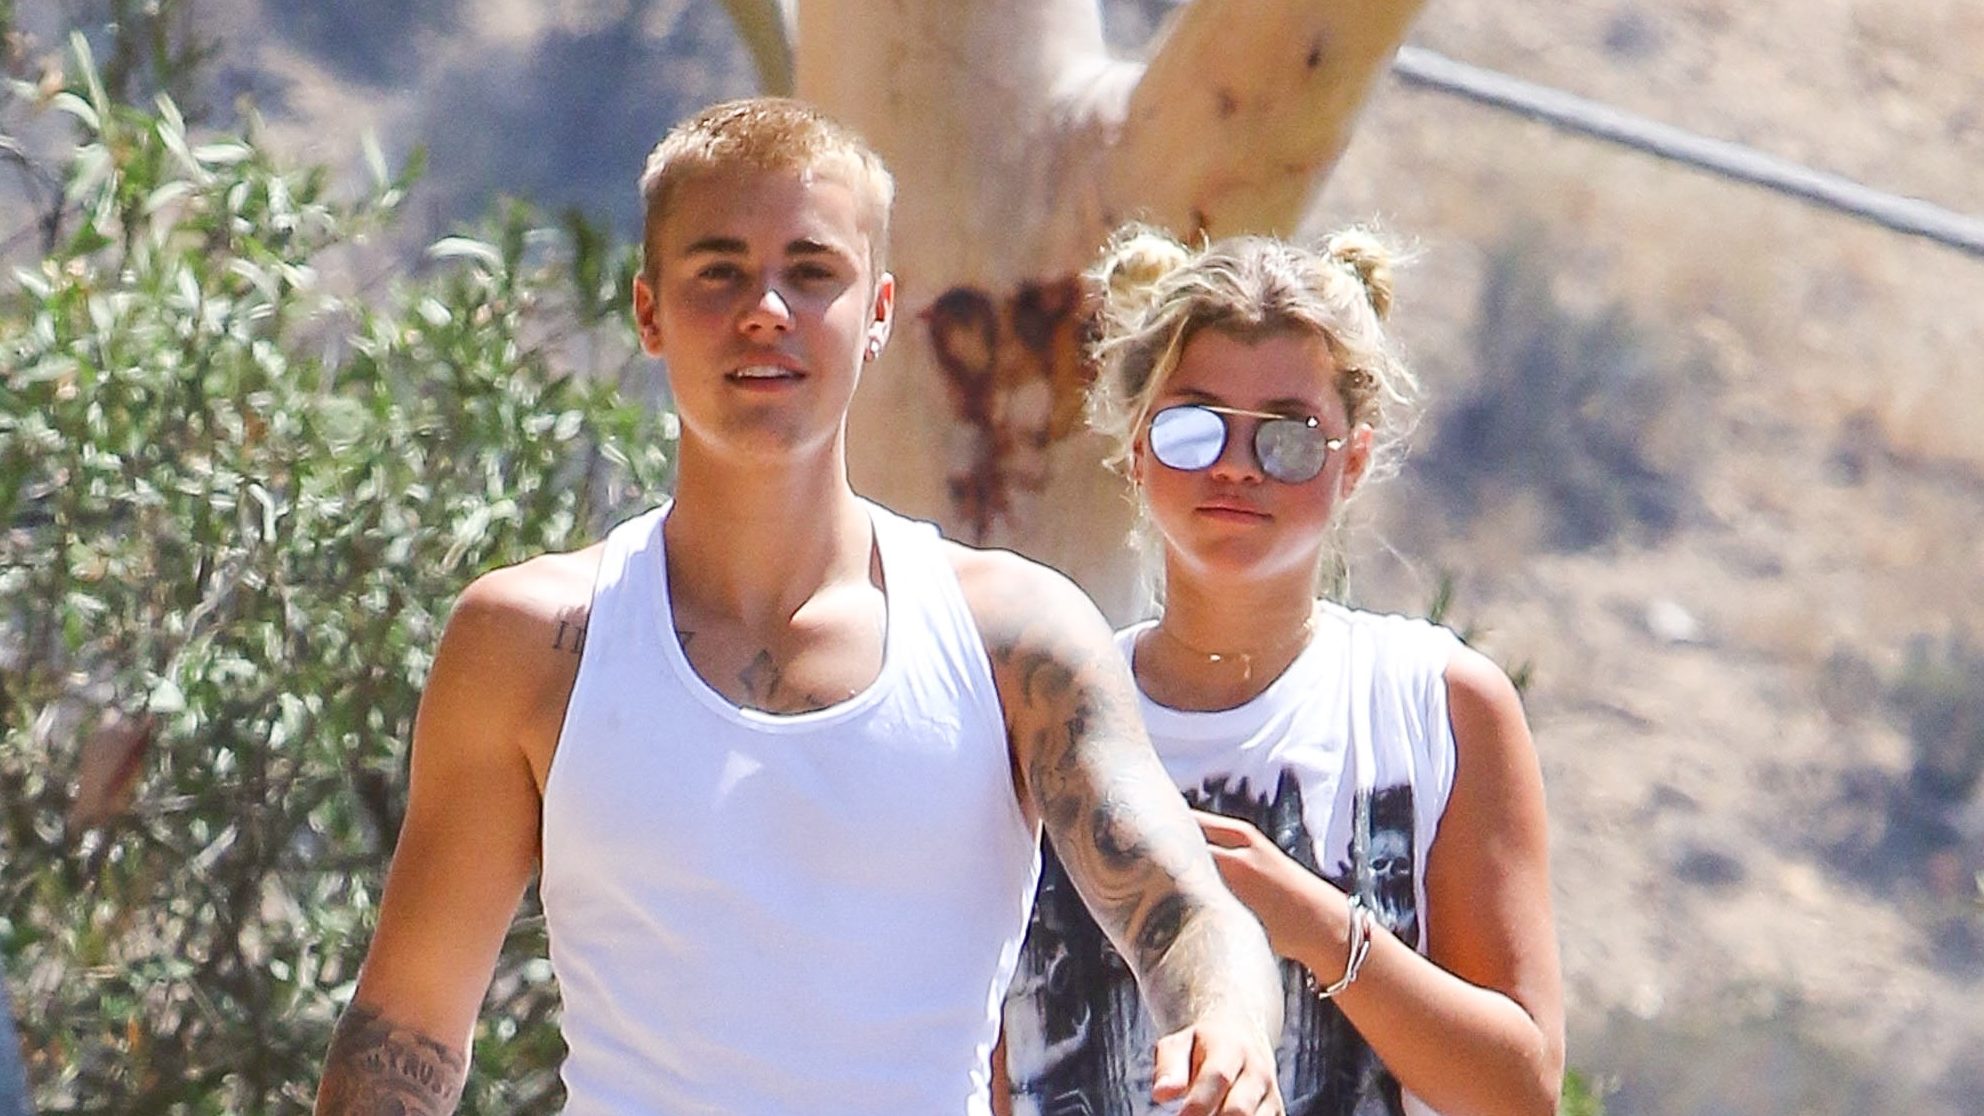 LOS ANGELES, CA - AUGUST 10: Justin Bieber is seen with model Sofia Richie on August 10, 2016 in Los Angeles, California. (Photo by BG003/Bauer-Griffin/GC Images)